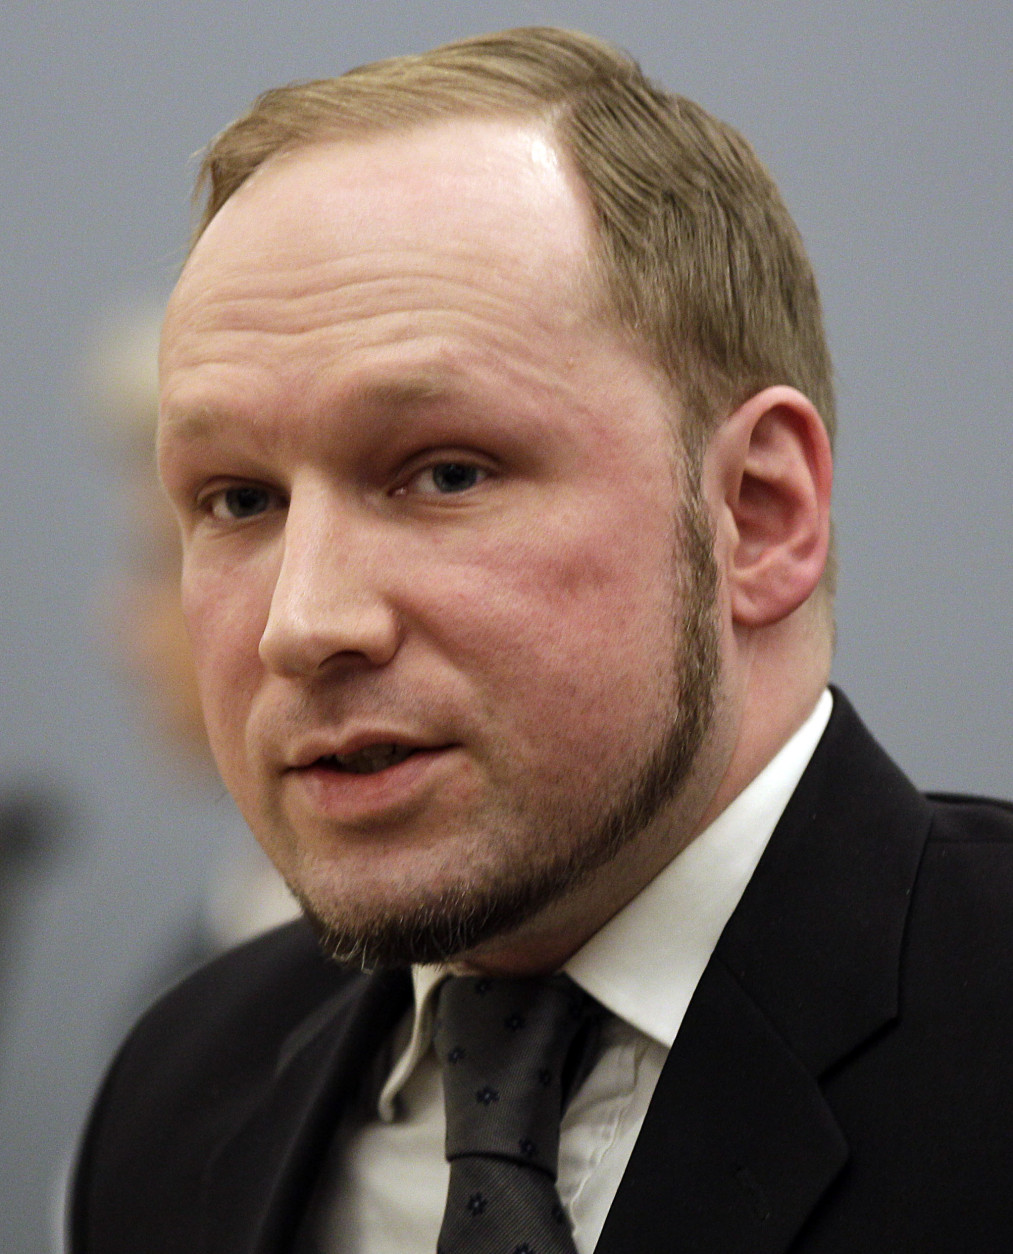 On this date in 2011, Anders Breivik massacred 69 people at a Norwegian island youth retreat after detonating a bomb in nearby Oslo that killed eight others. Here, Breivik  is seen in a courtroom after his trial on Aug. 24, 2012. (AP Photo/Frank Augstein)